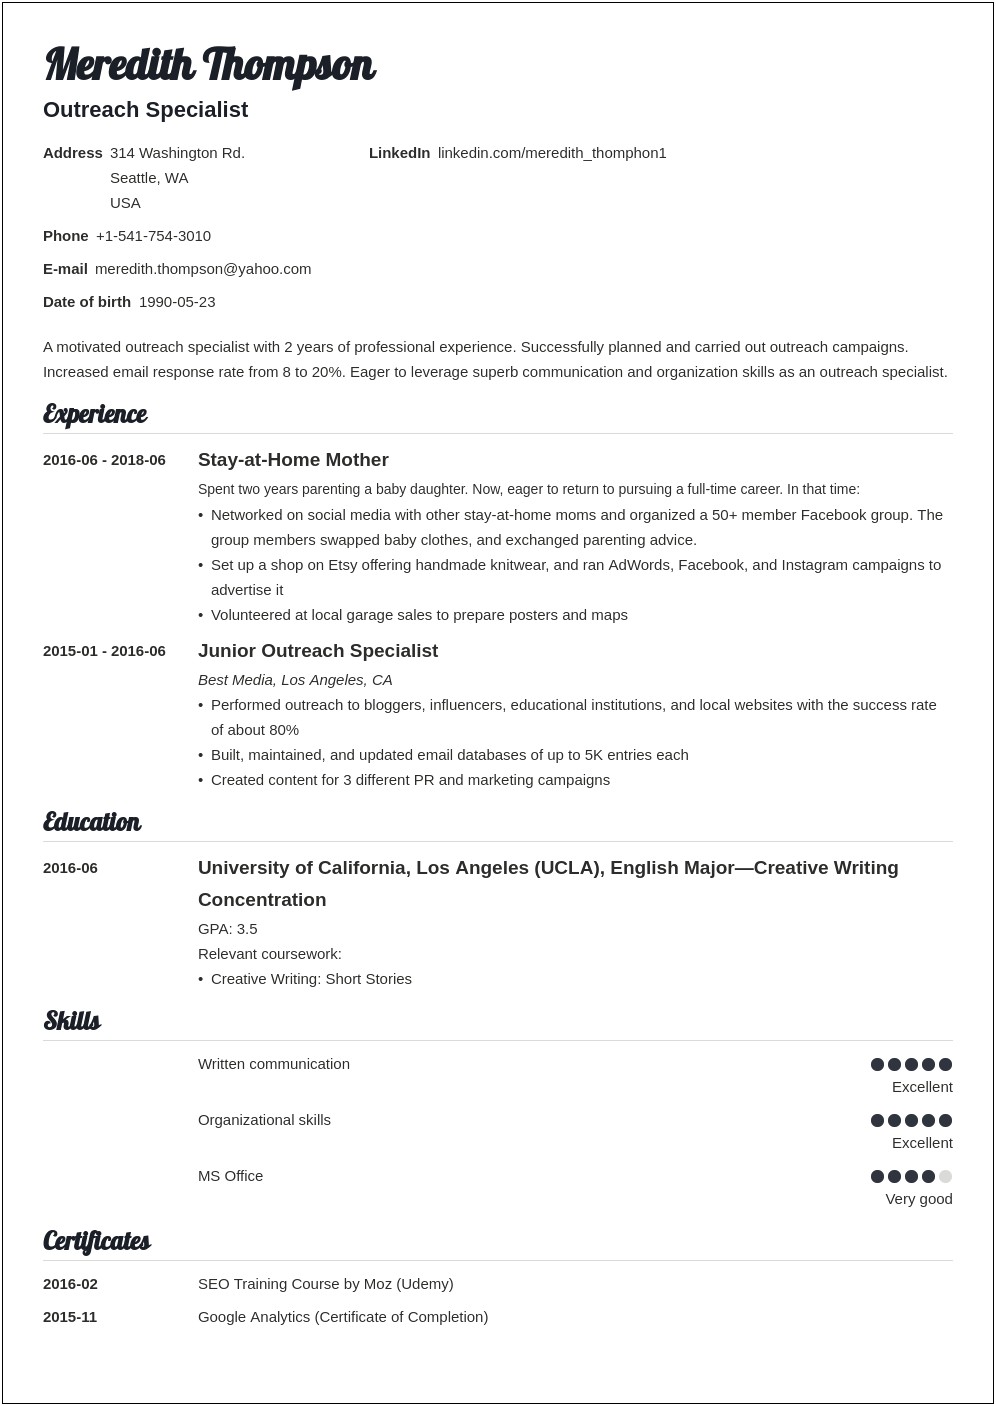 Work At Home Professional Profile Resume Examples